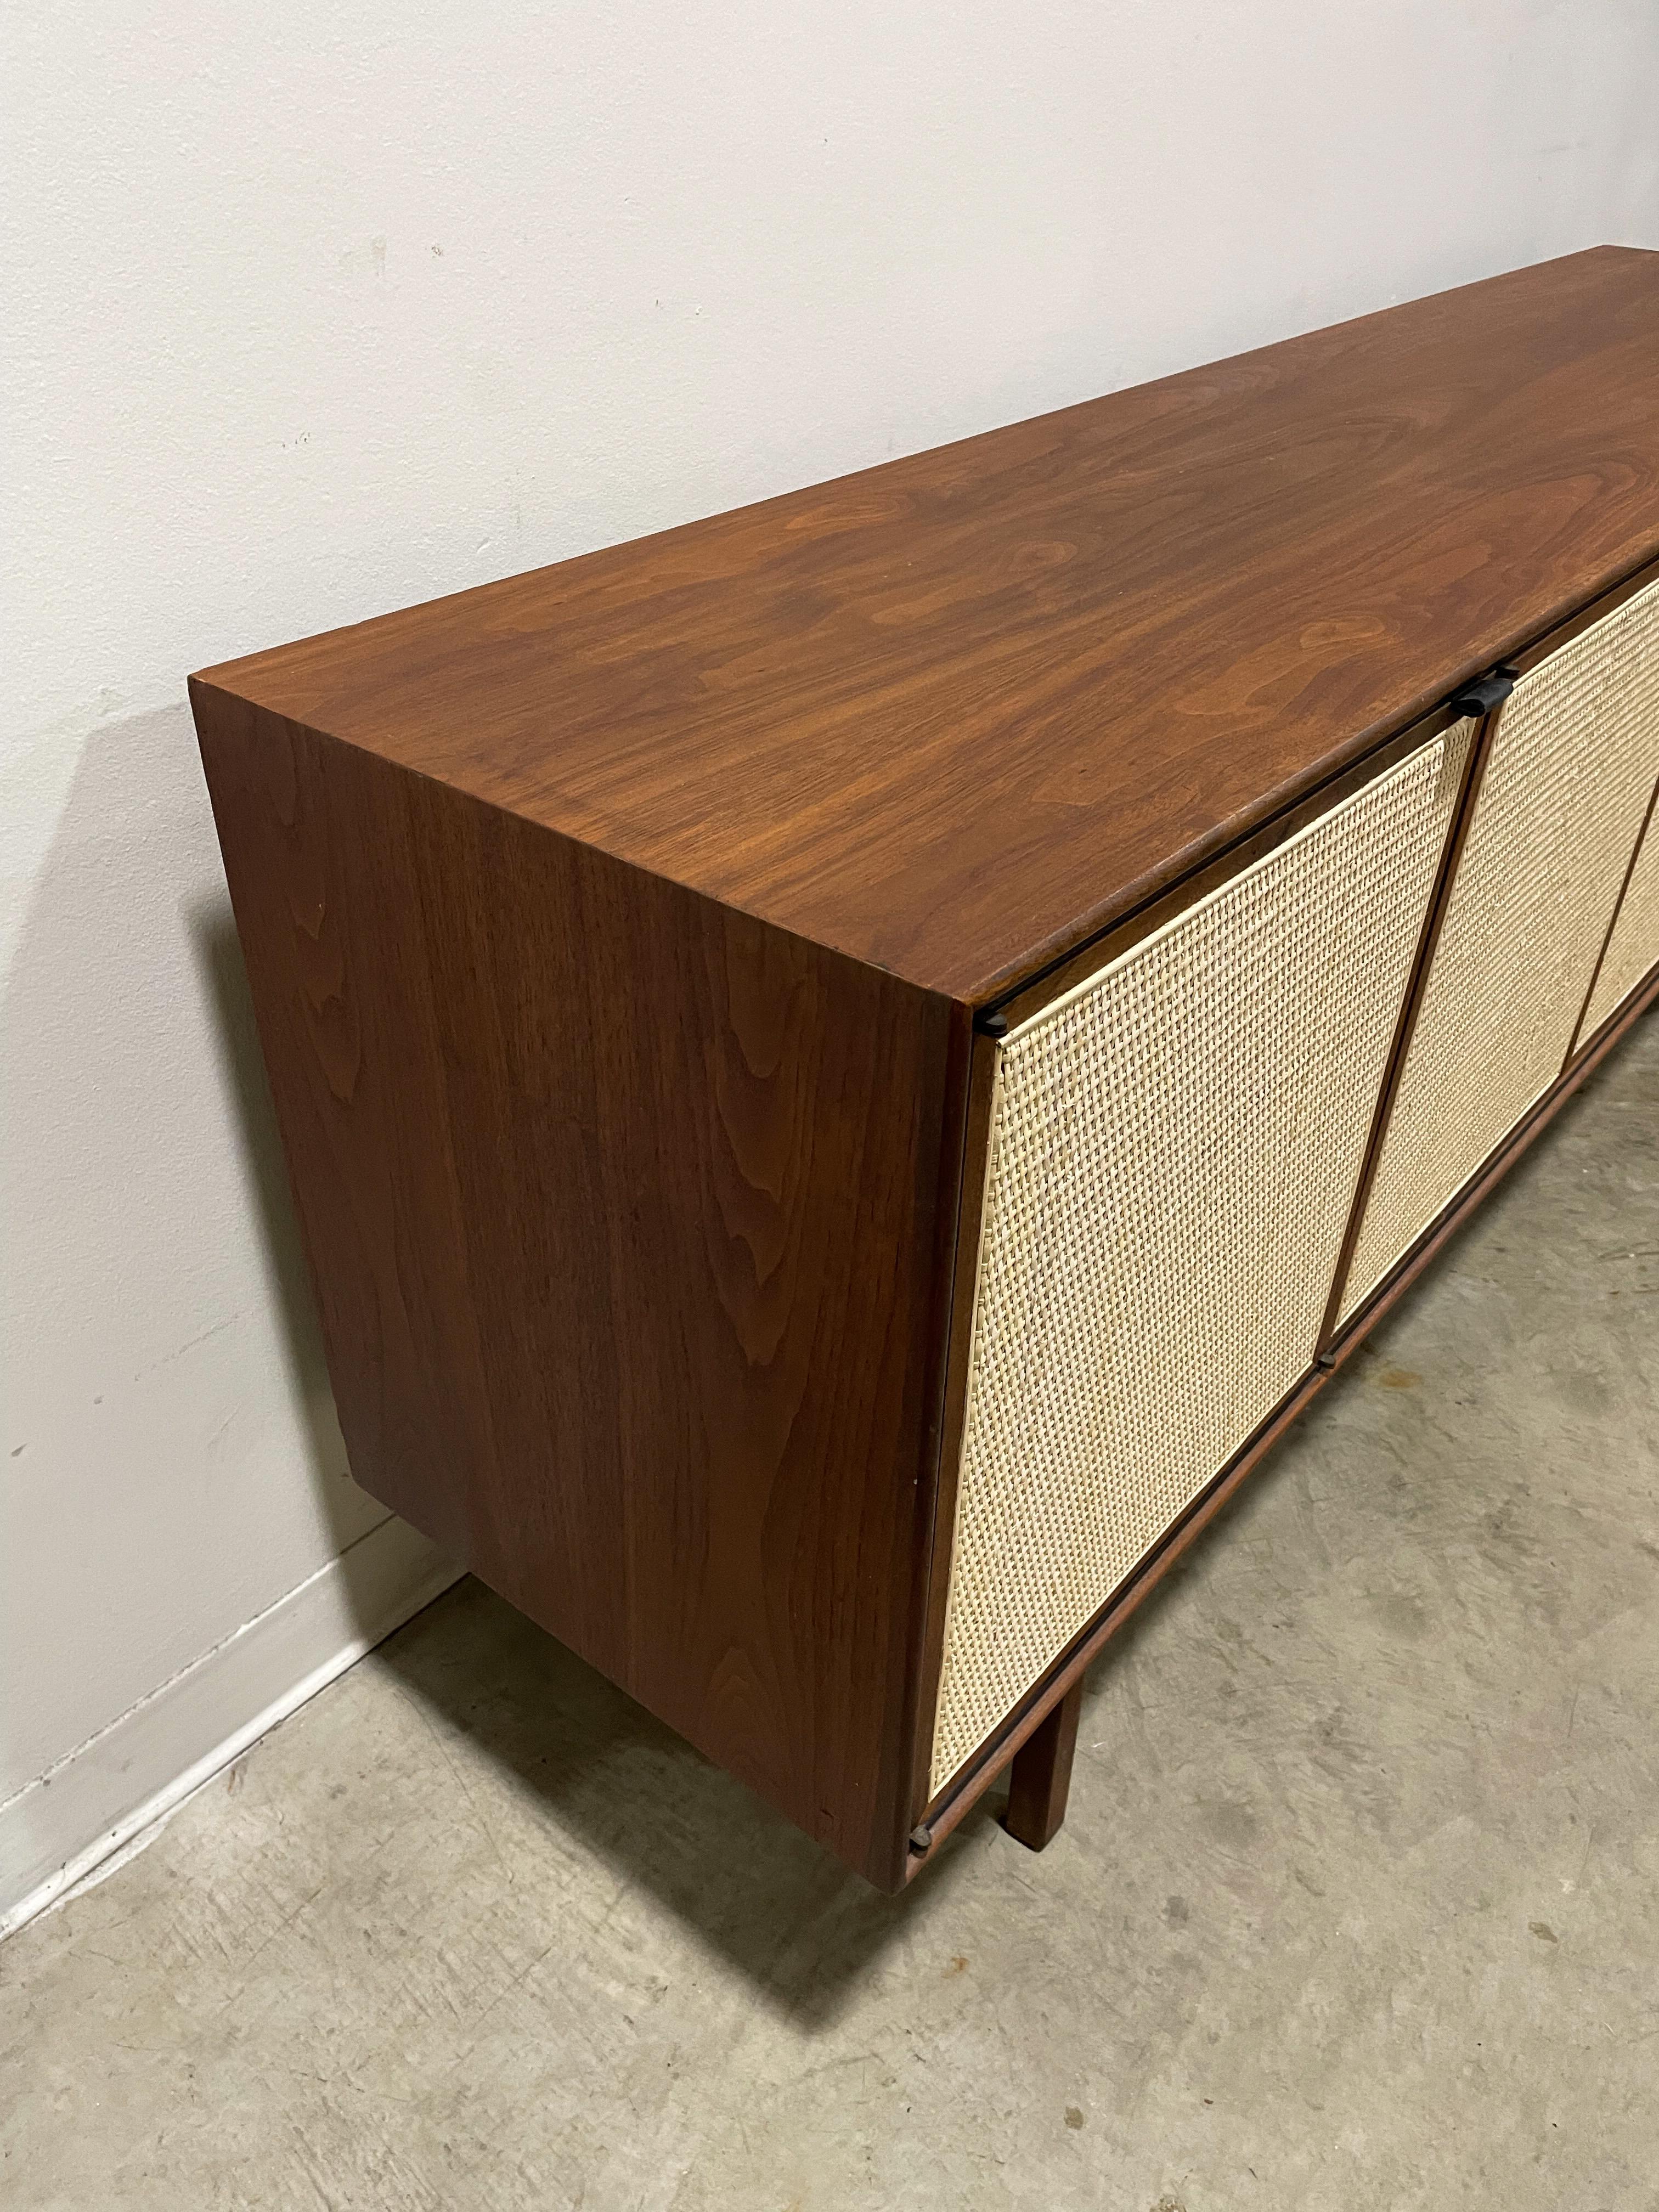 Walnut and Cane Mid Century Modern Credenza by Founders 9